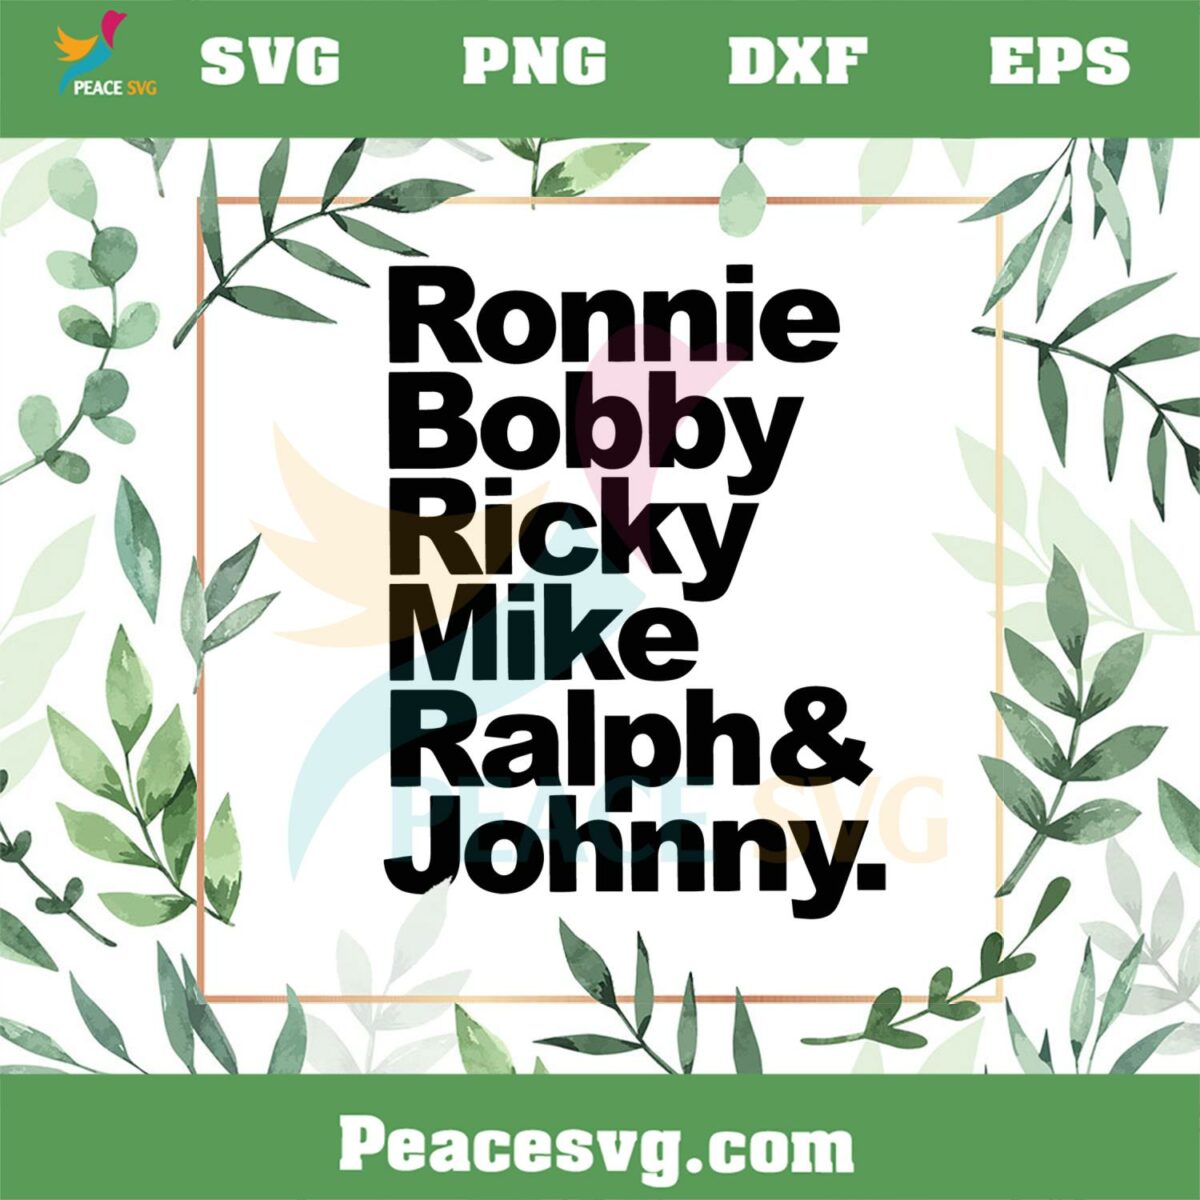 New Edition Band Ronnie Bobby Ricky Mike Ralph And Johnny SVG Cutting Files